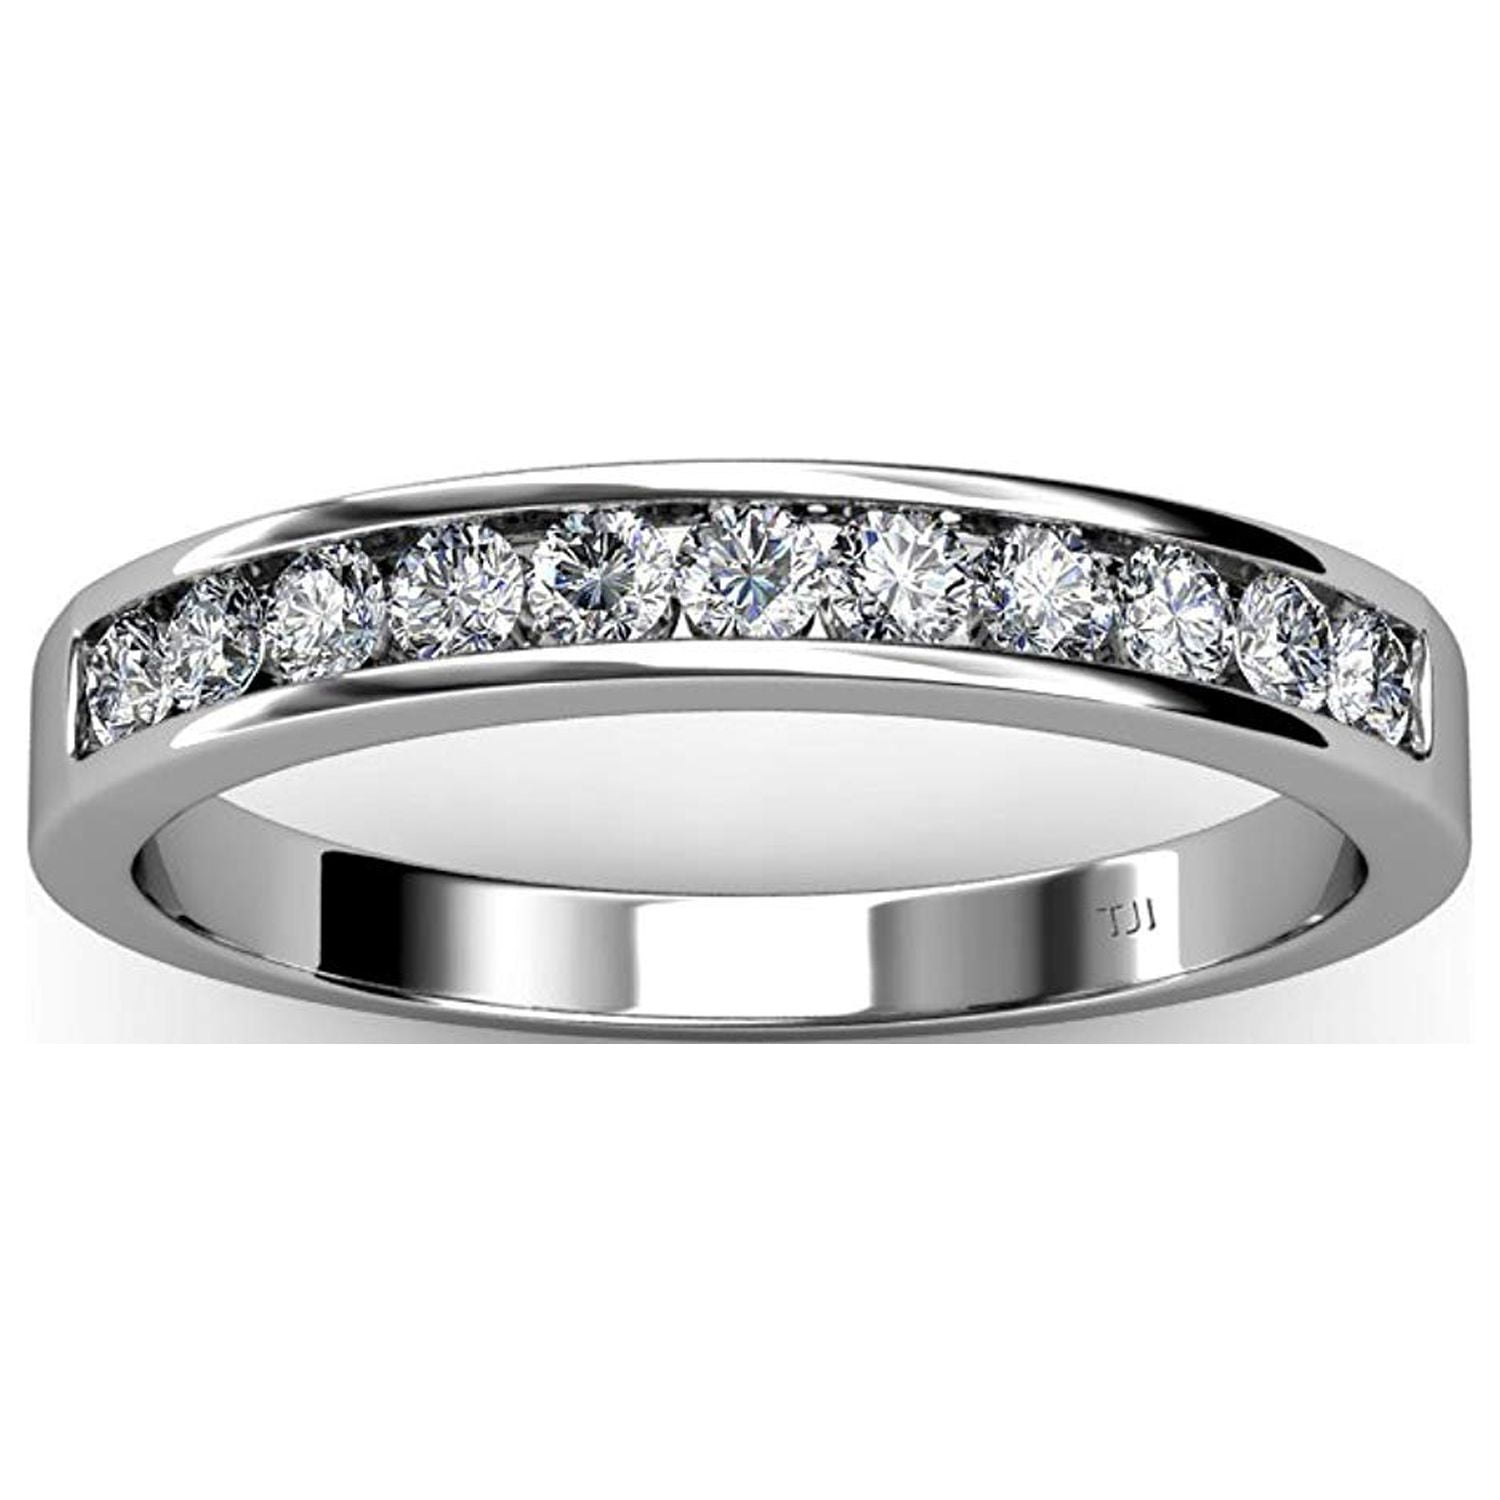 Diamond 11 Stone Channel Set Wedding Band (VS2-SI1, F-G) 0.55 ct tw in 18K White  Gold.size 5.5 